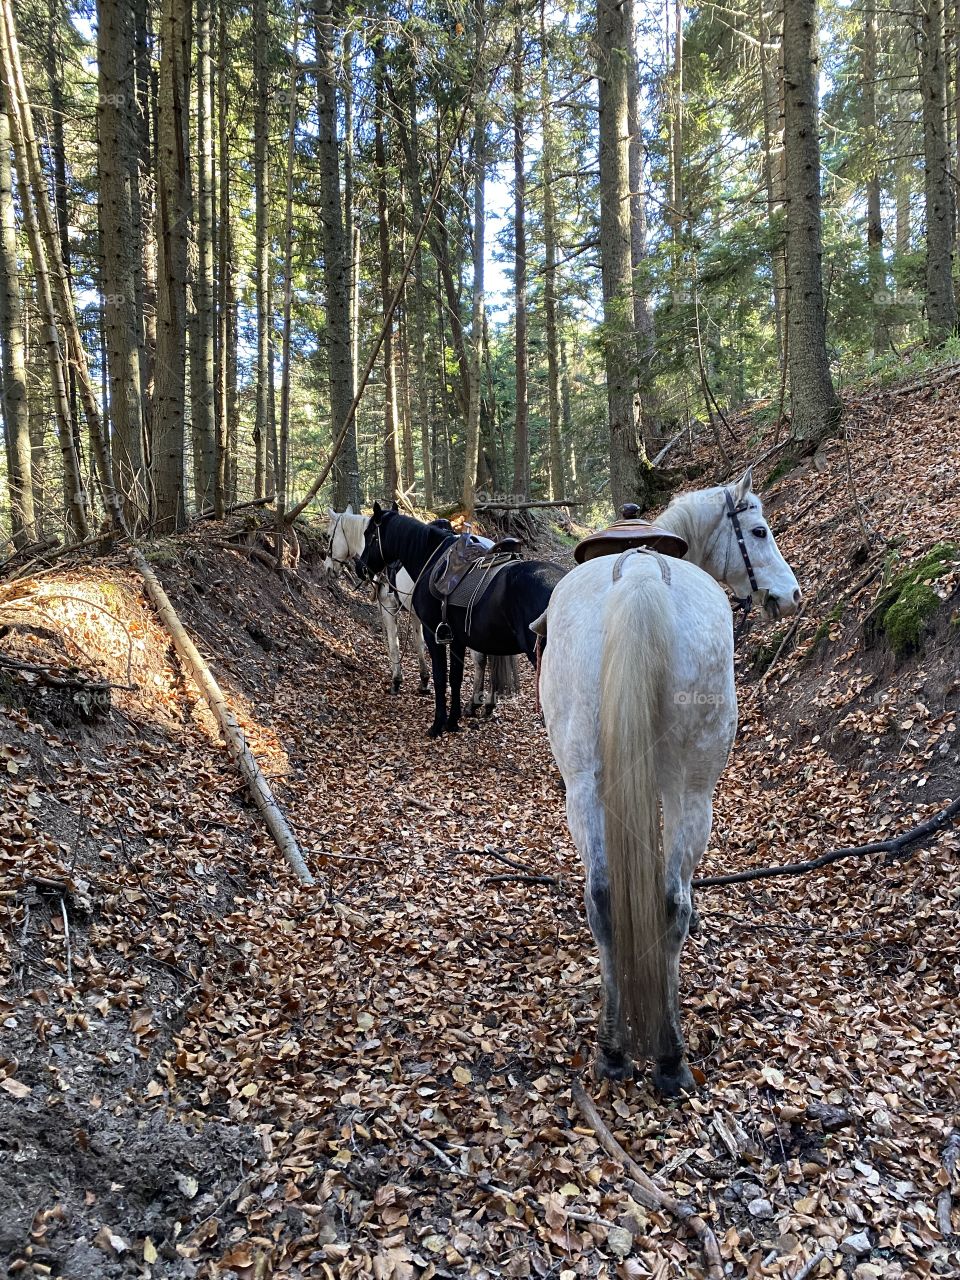 Three horse’s in the forest